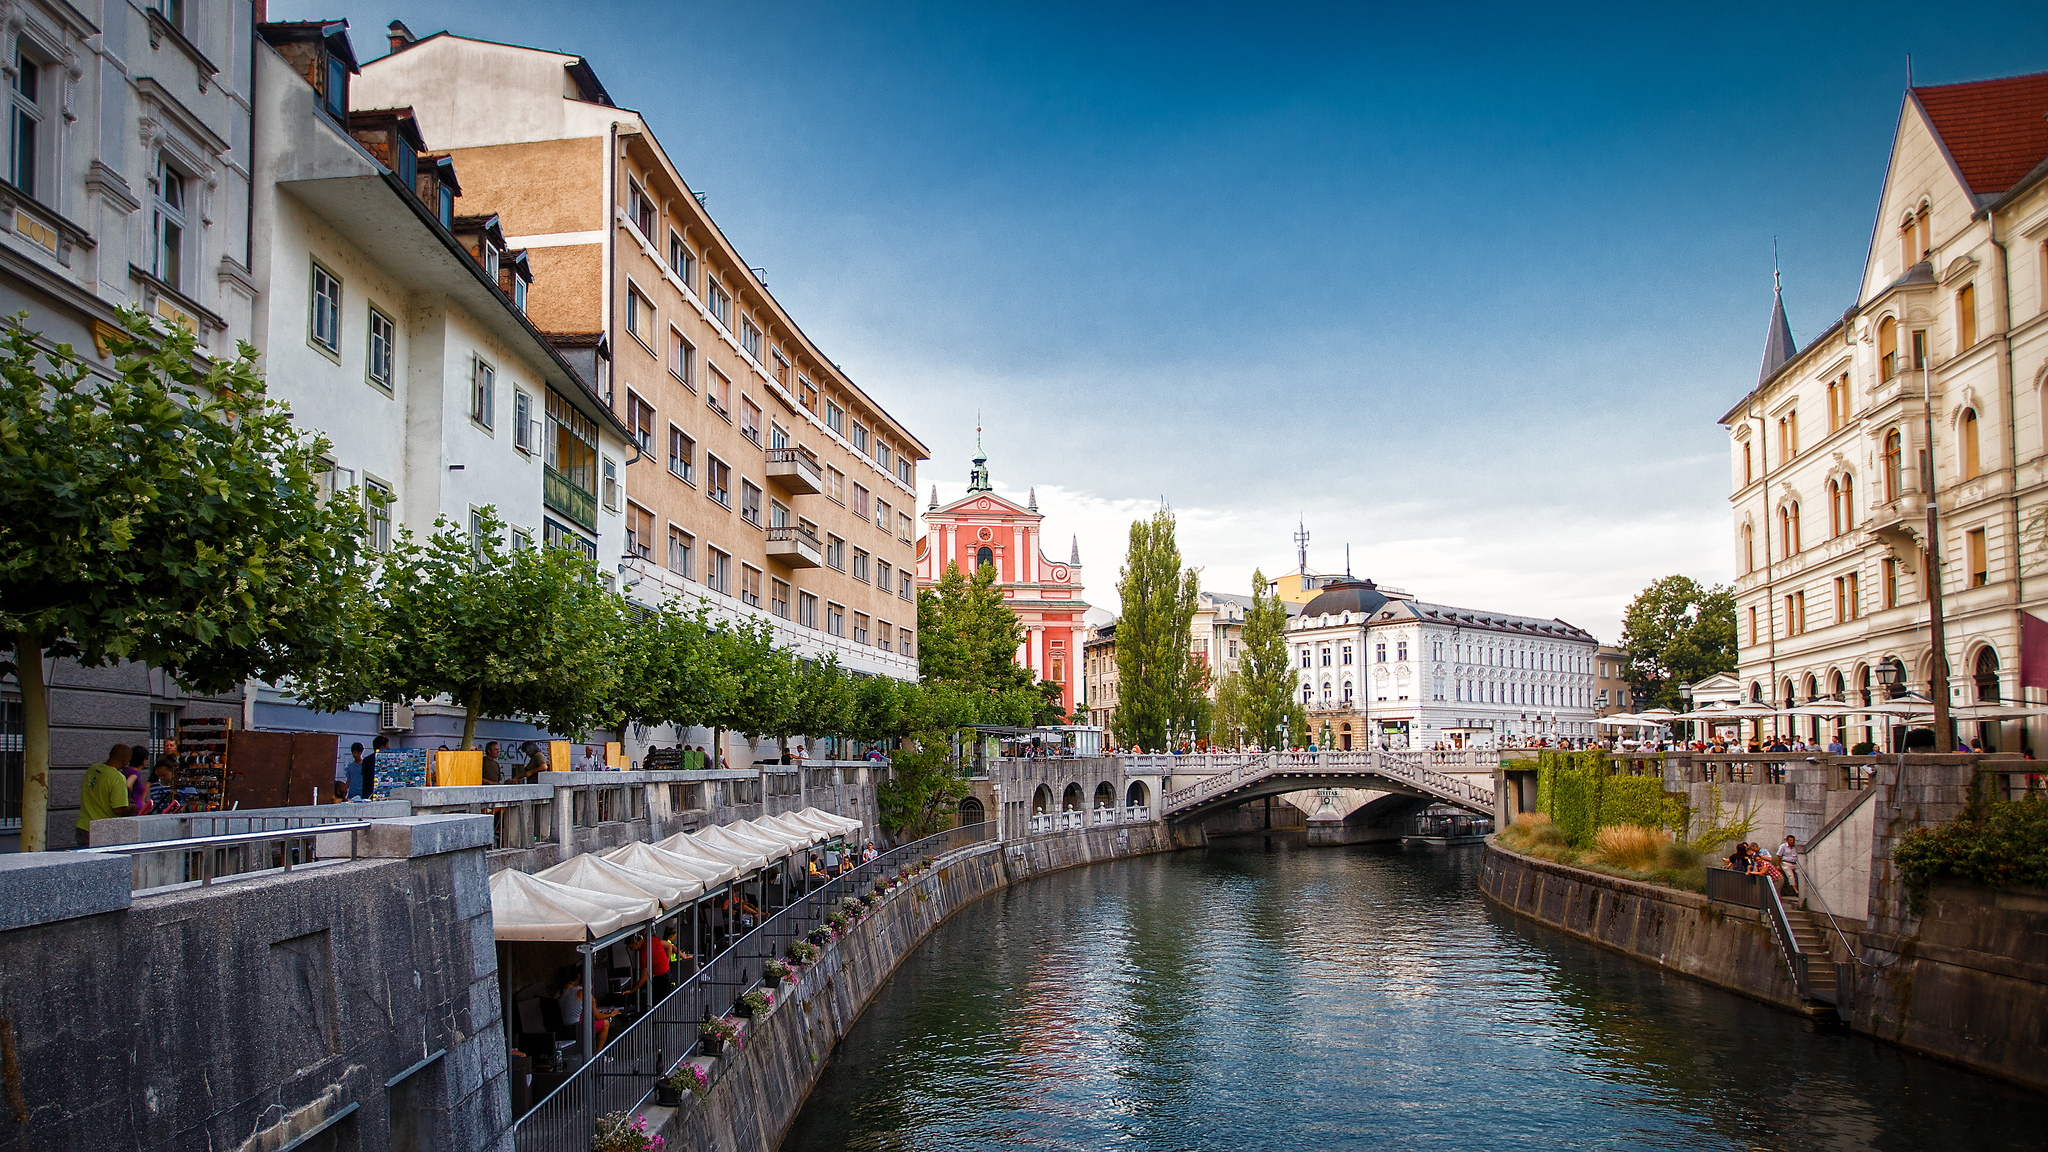 Ljubljana – a Small Town With a Wide Soul